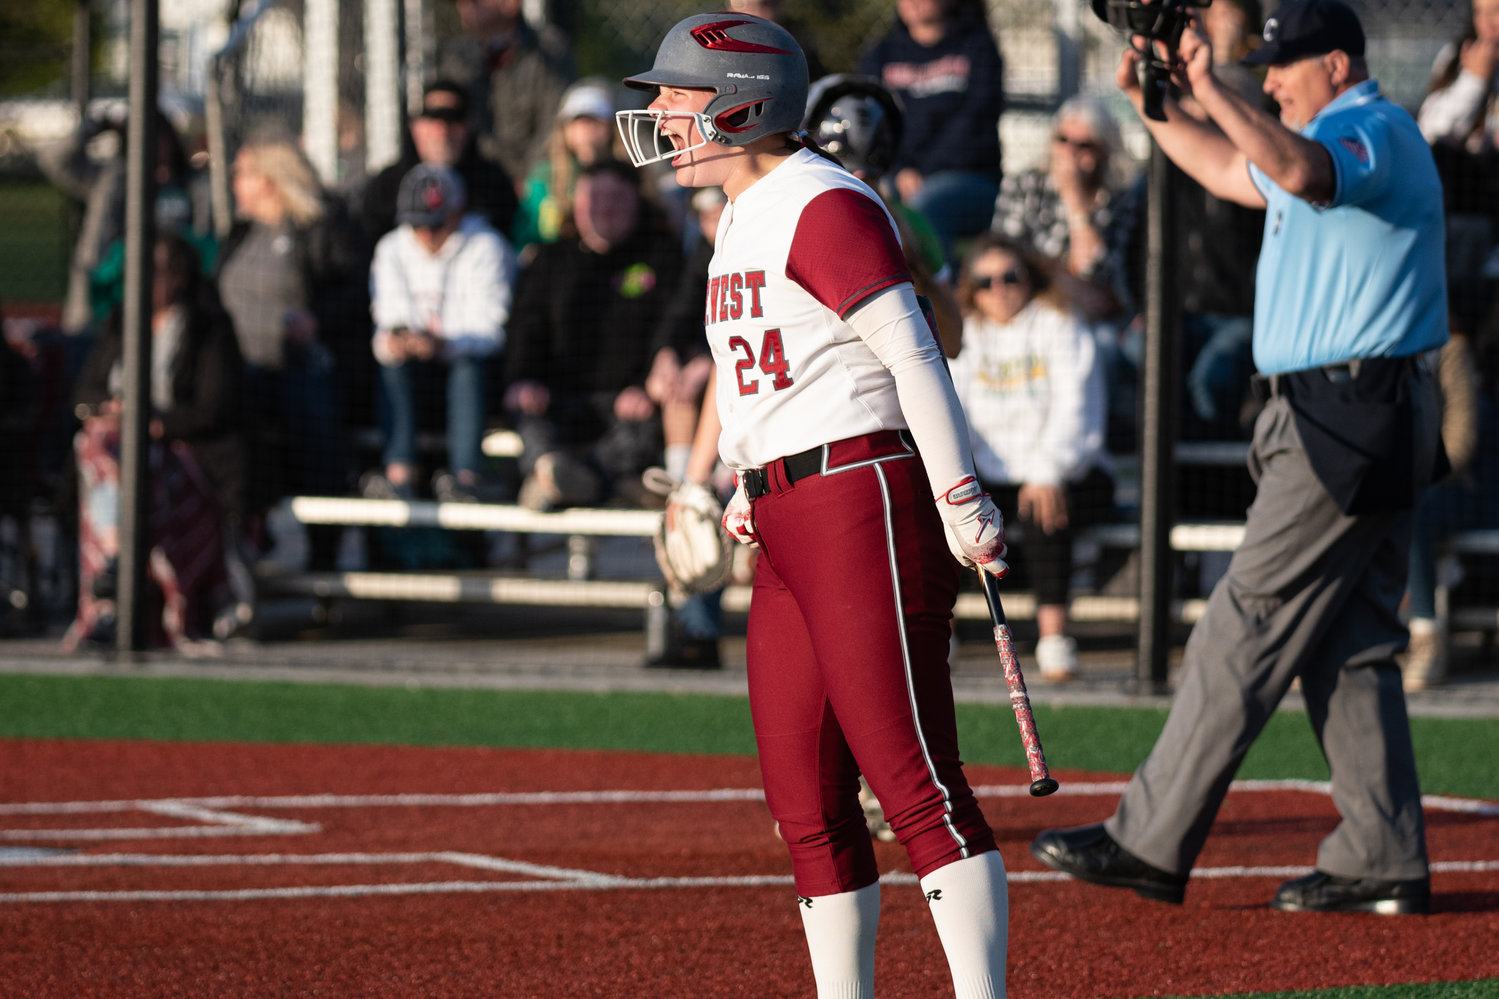 W.F. West's Savannah Hawkins yells after Brielle Etter's game-tying 2-RBI double in the seventh inning against Tumwater in the 2A District 4 championship game at Rec Park May 20.